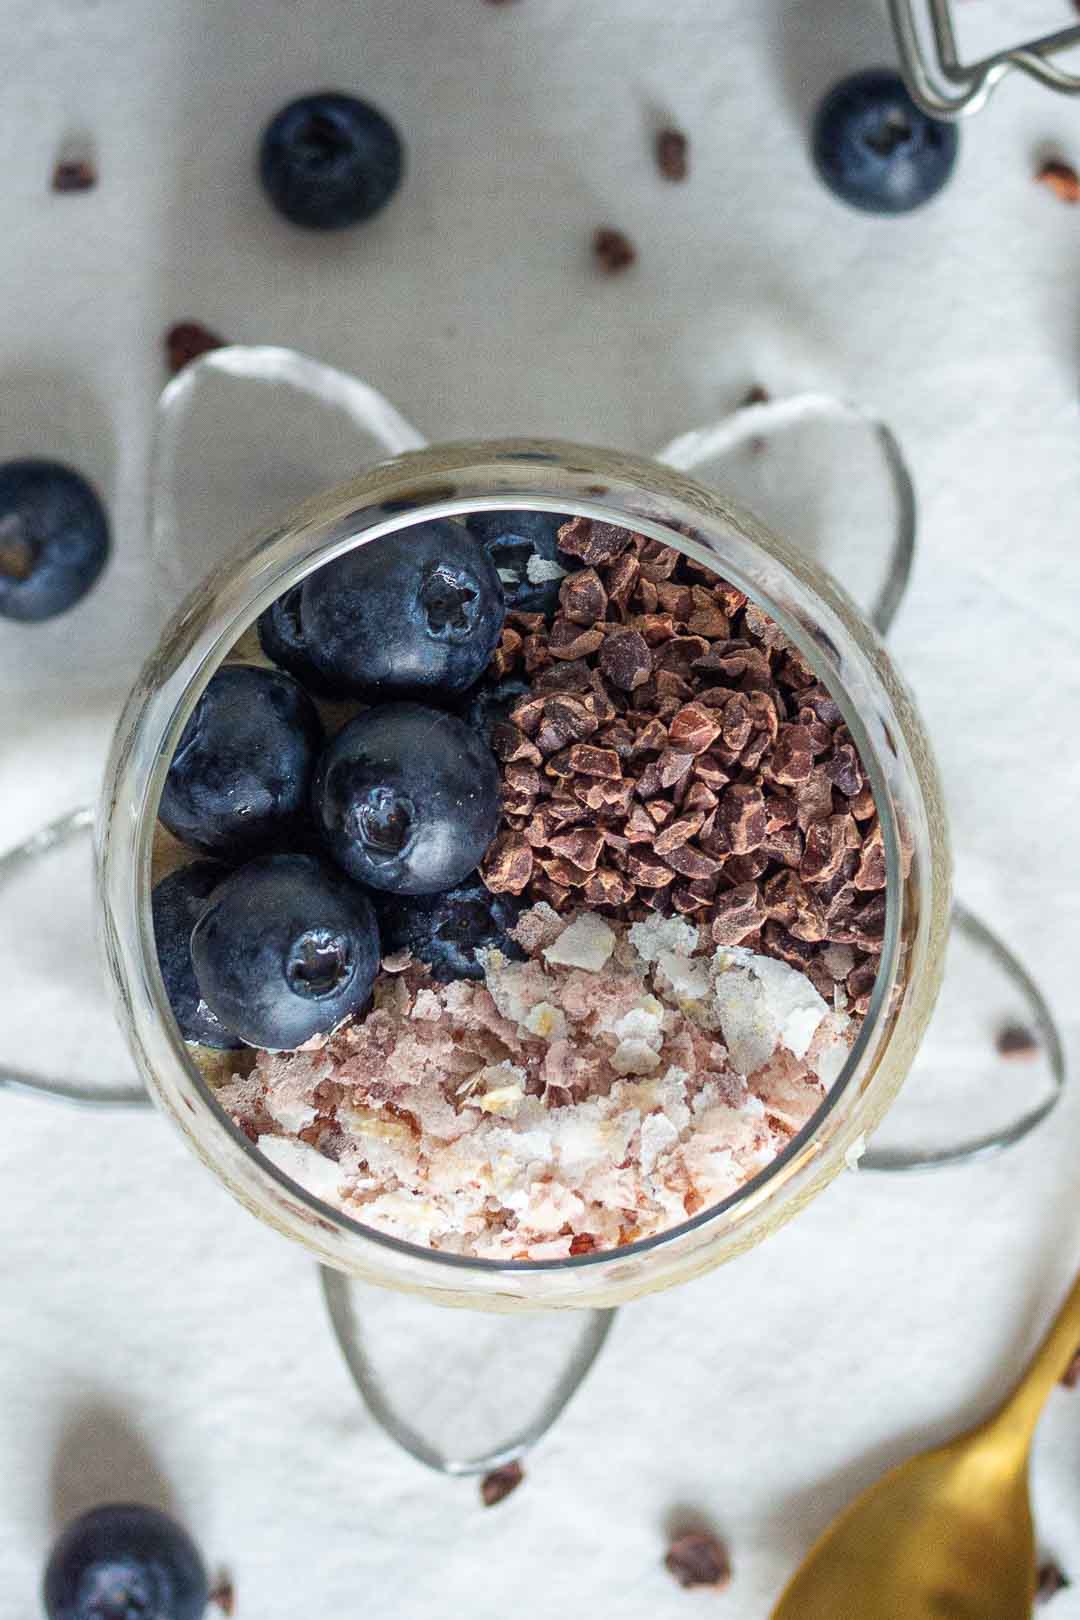 top view of a glass with cocoa nibs, brown rice flakes and blueberries inside